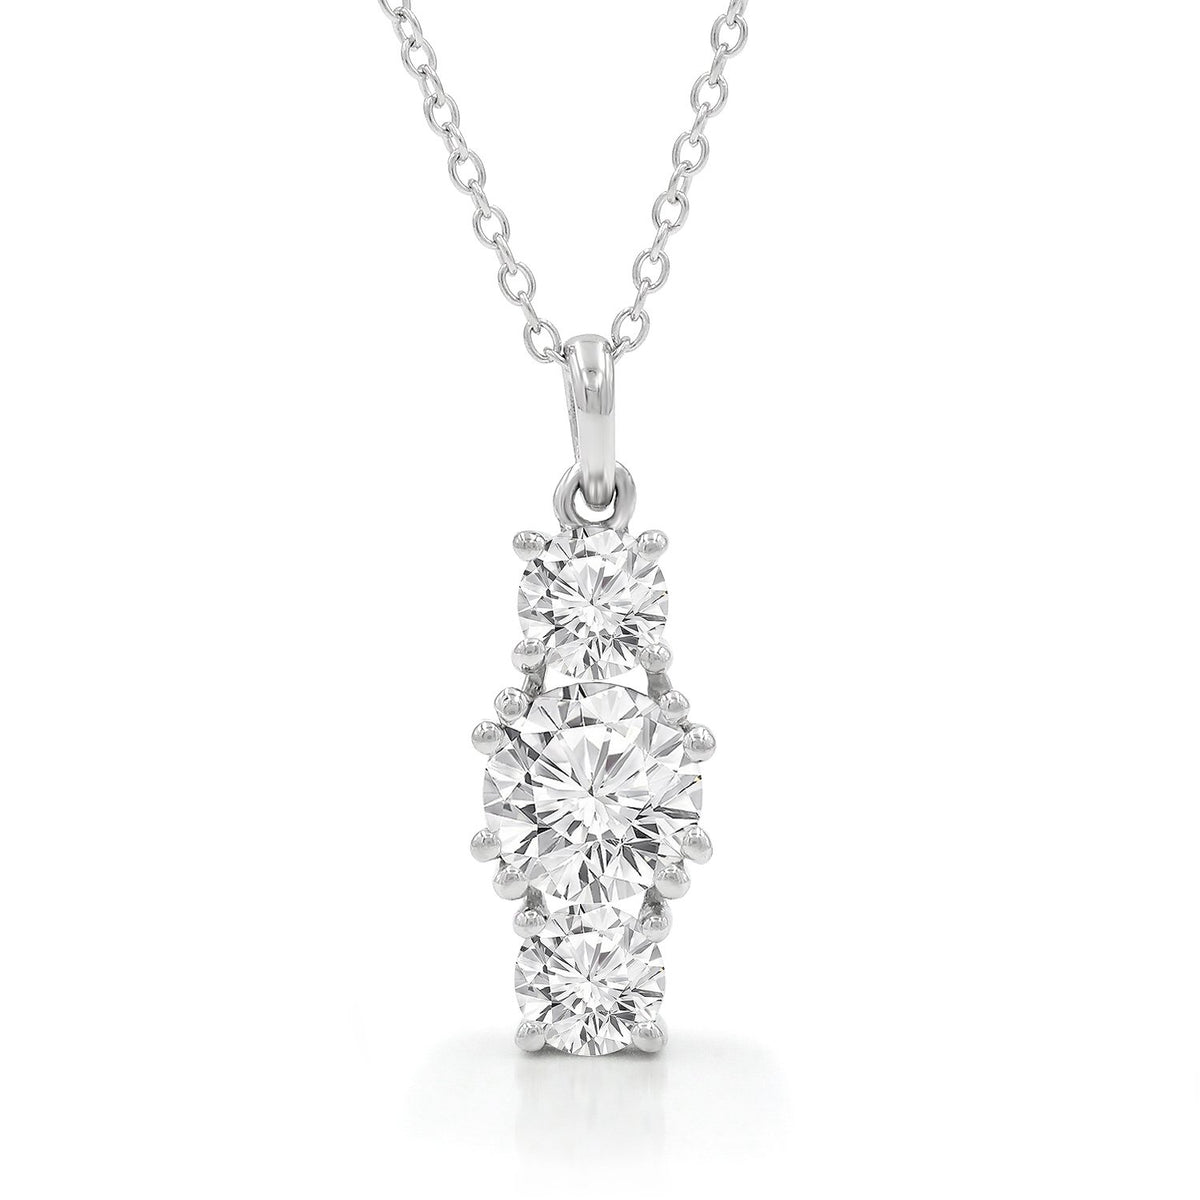 3.10 CTTW Moissanite Linear Pendant Necklace in 925 Sterling Silver